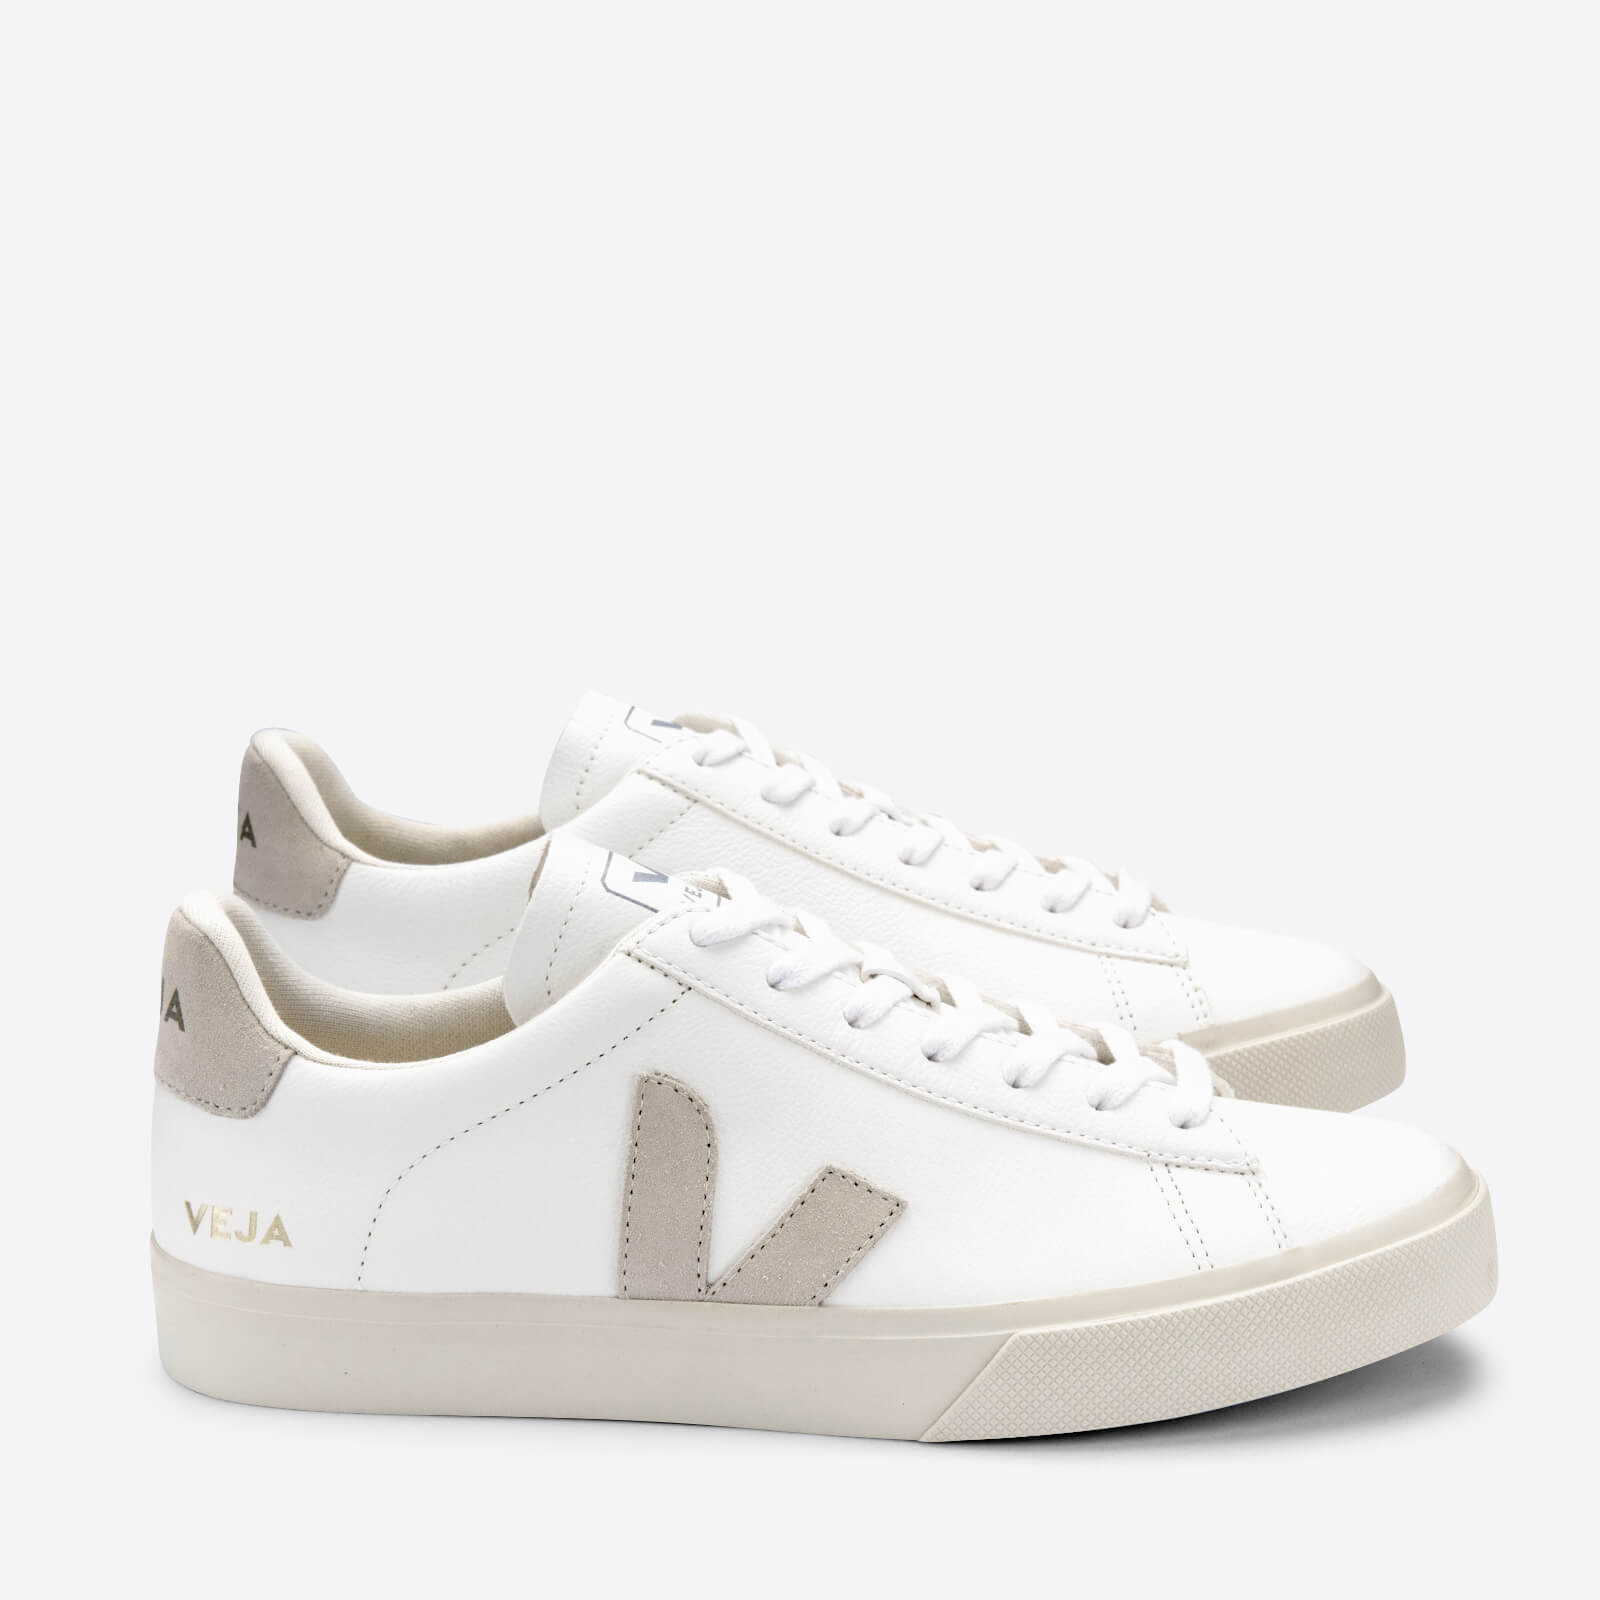 Veja Women's Campo Chrome Free Trainers - Extra White/Natural/Butter Sole - UK 3